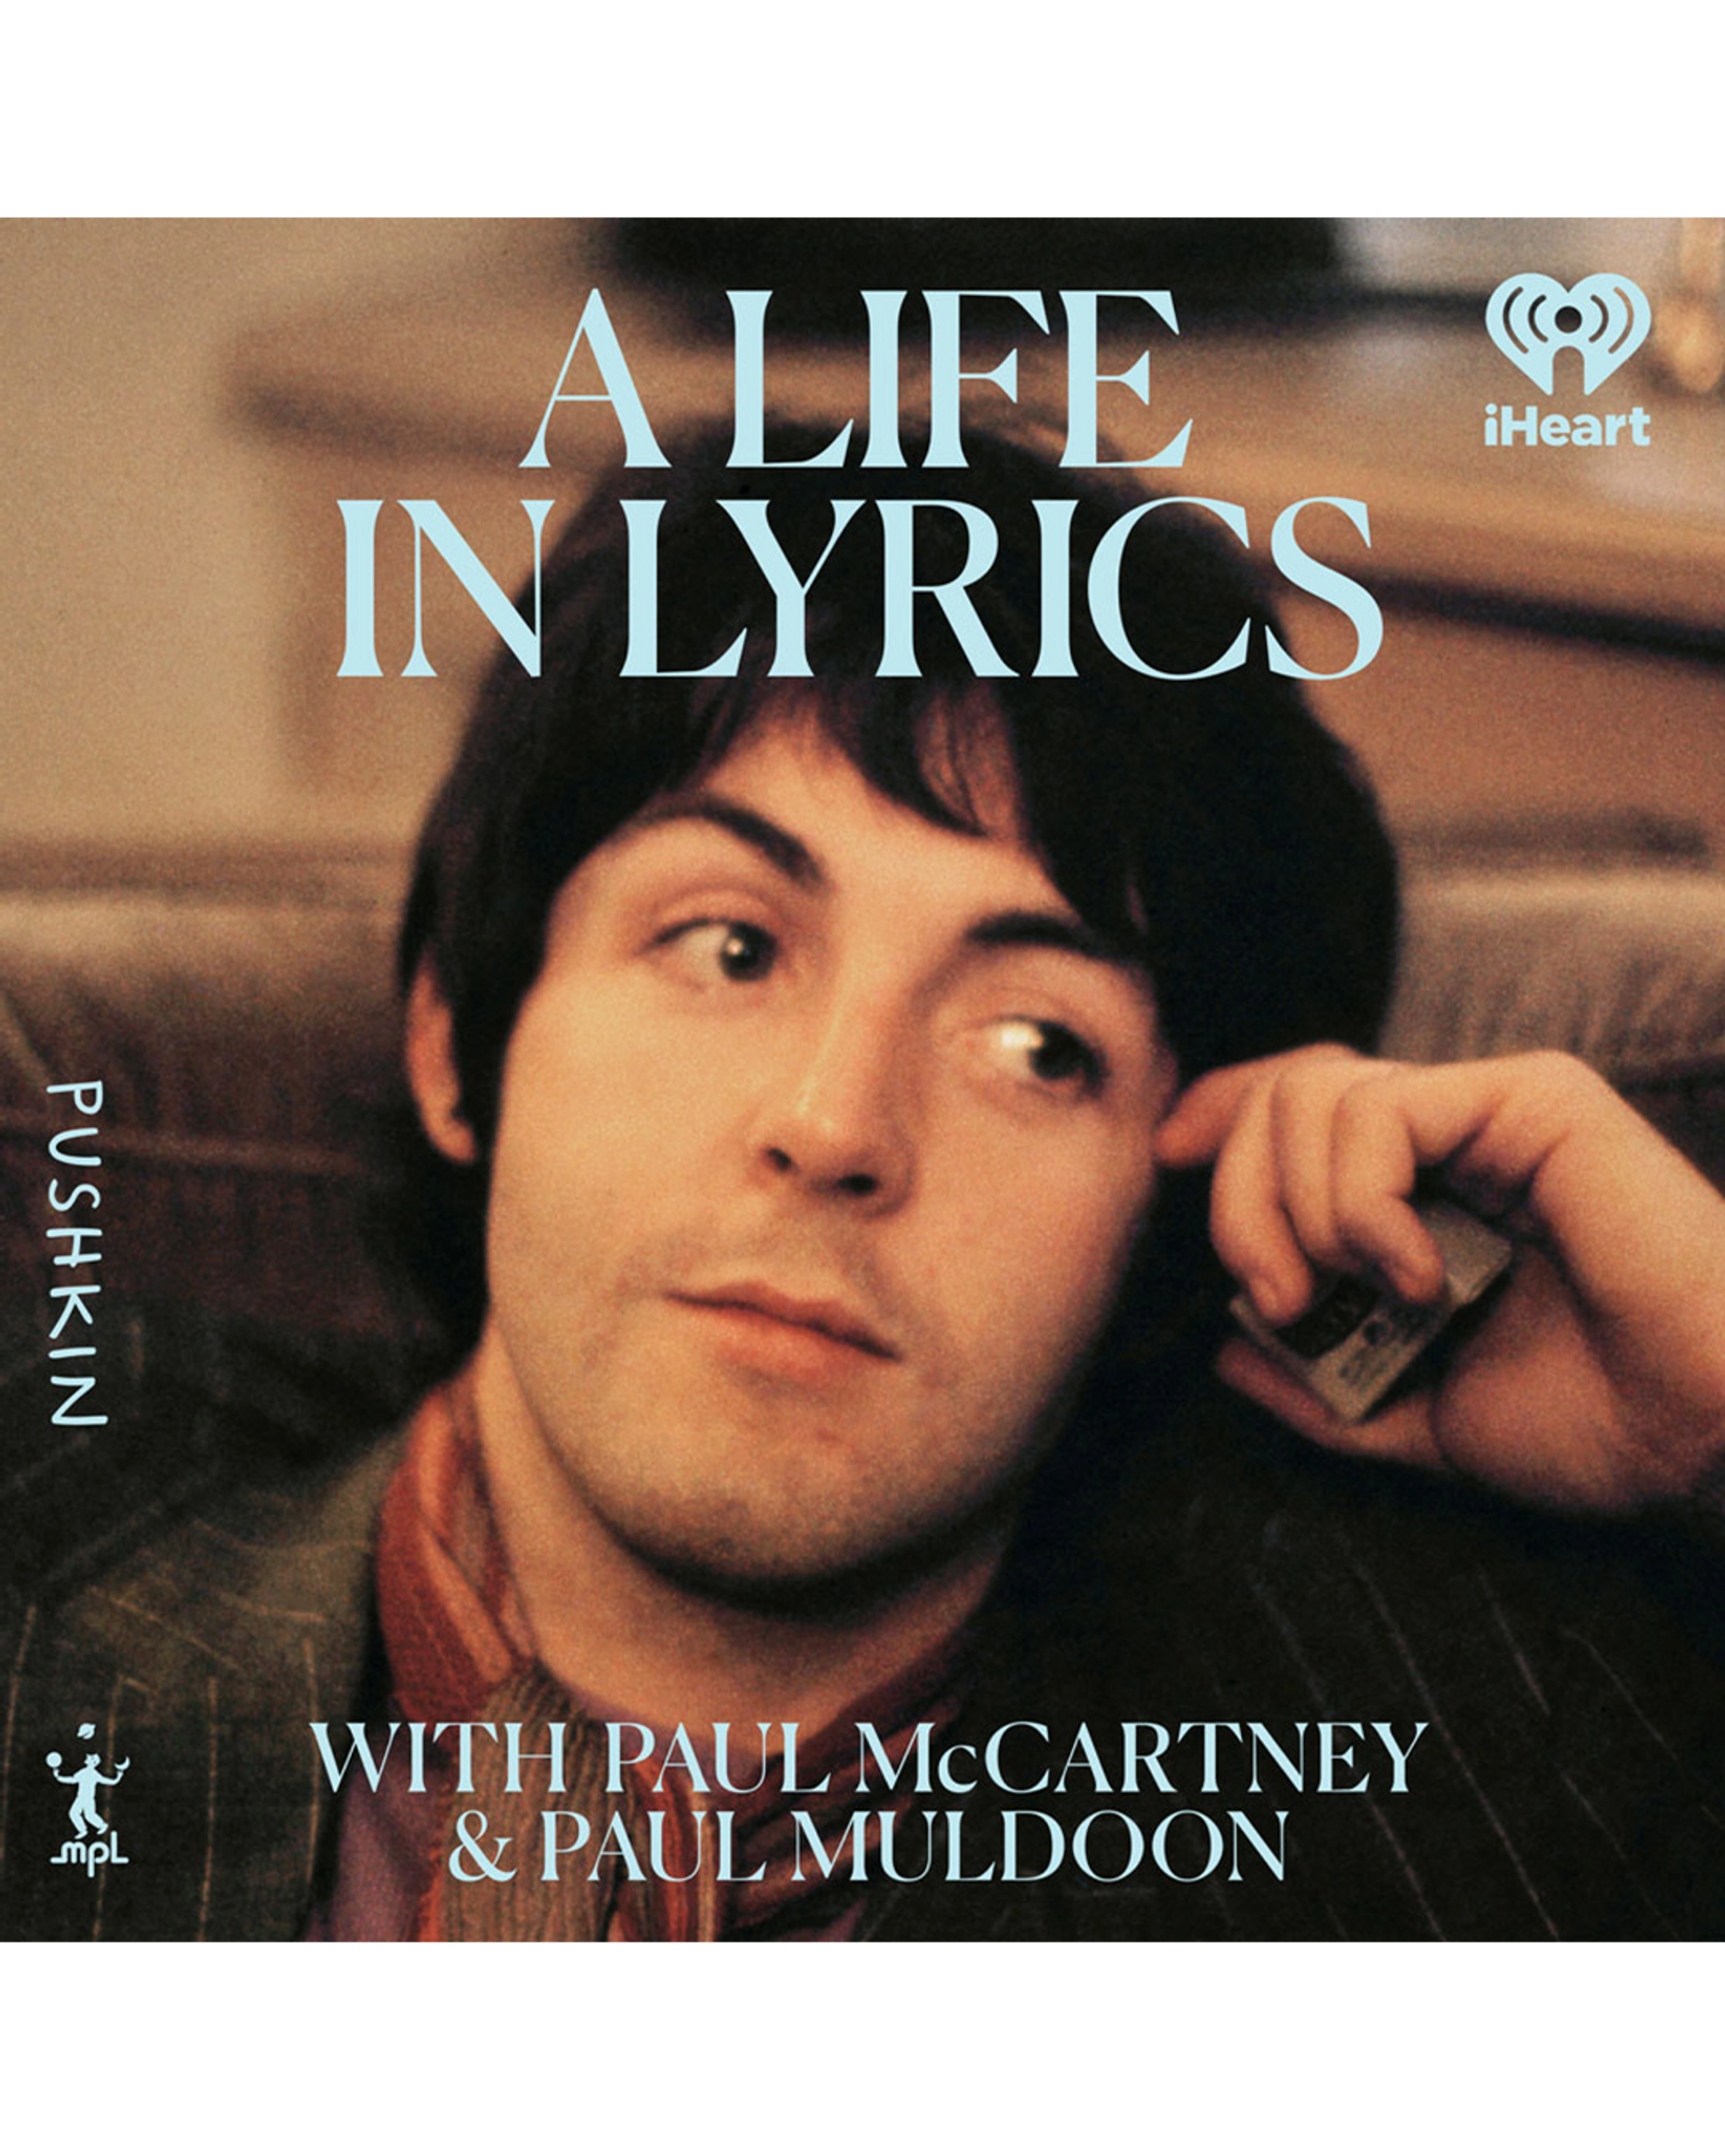 McCartney: A Life in Lyrics Podcast cover features a photo of Paul taken by Linda McCartney